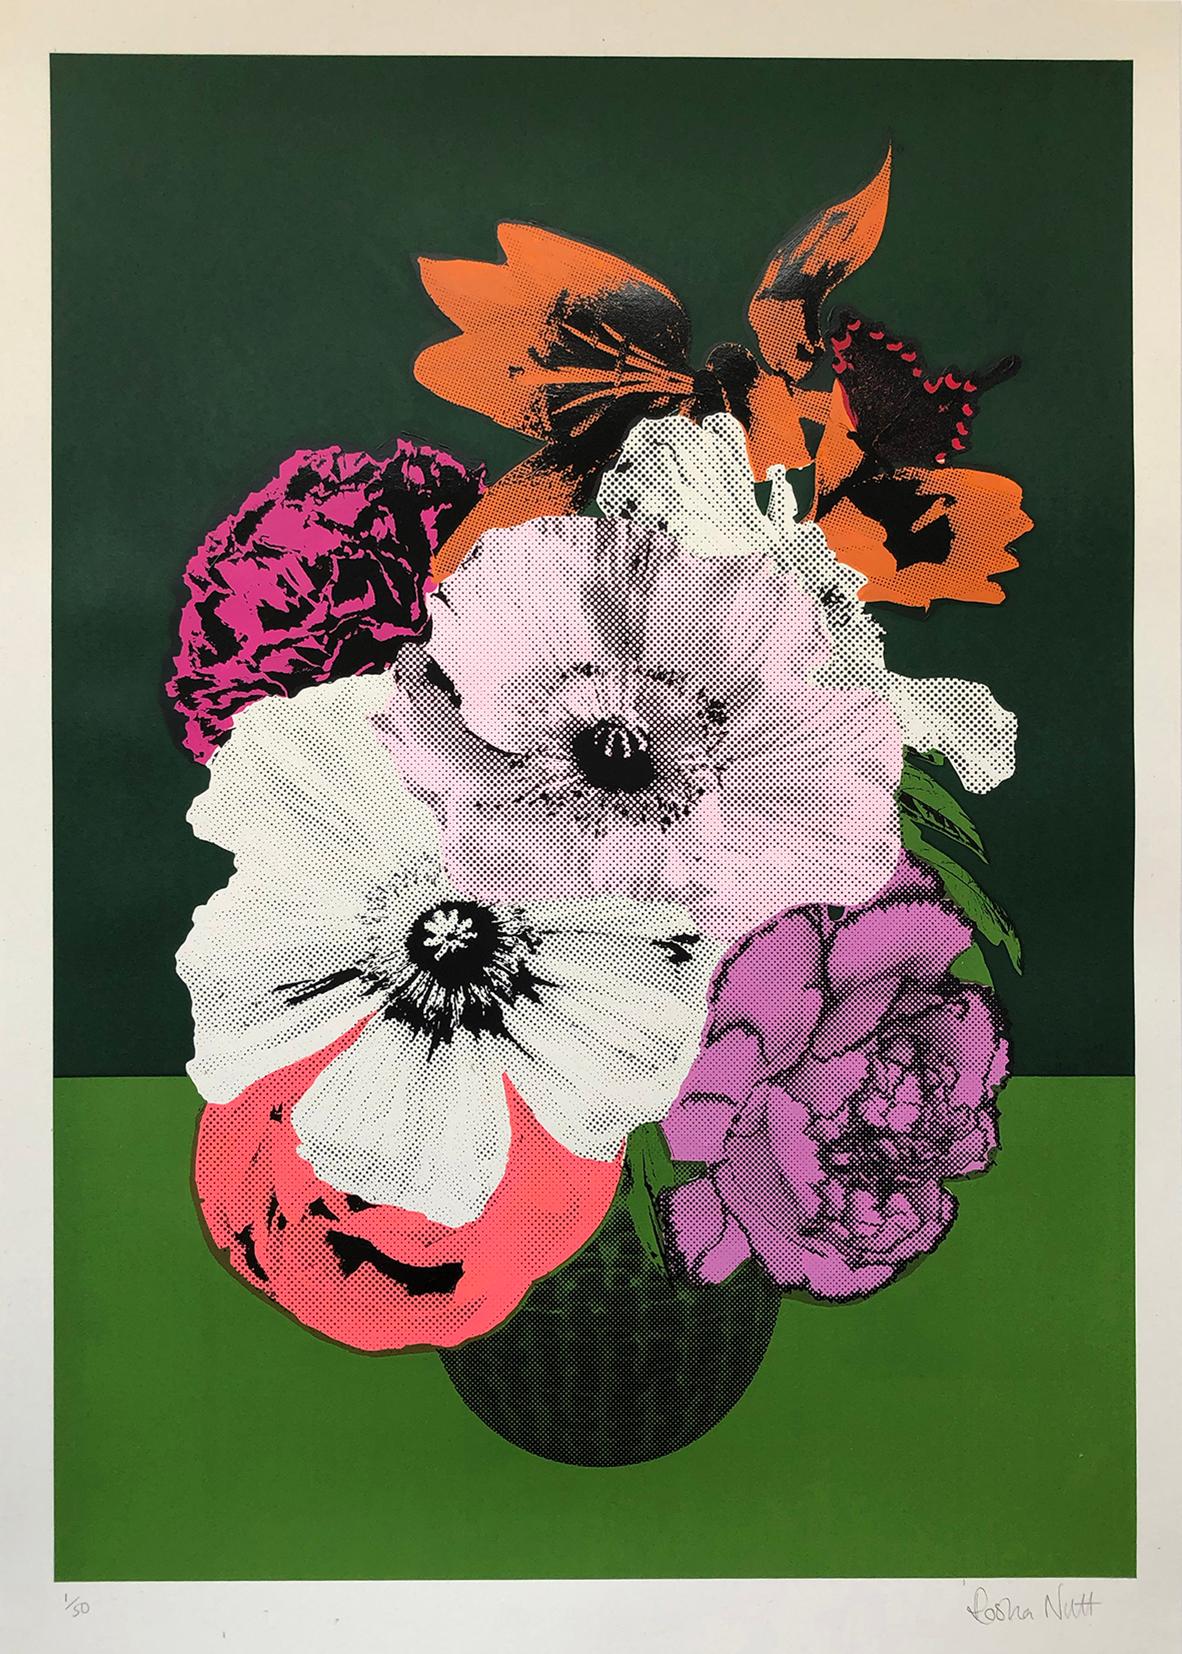 Rosha Nutt, Poppies and Lily, Screen print, Edition of 50, 50x70 cm, £150, 2020.